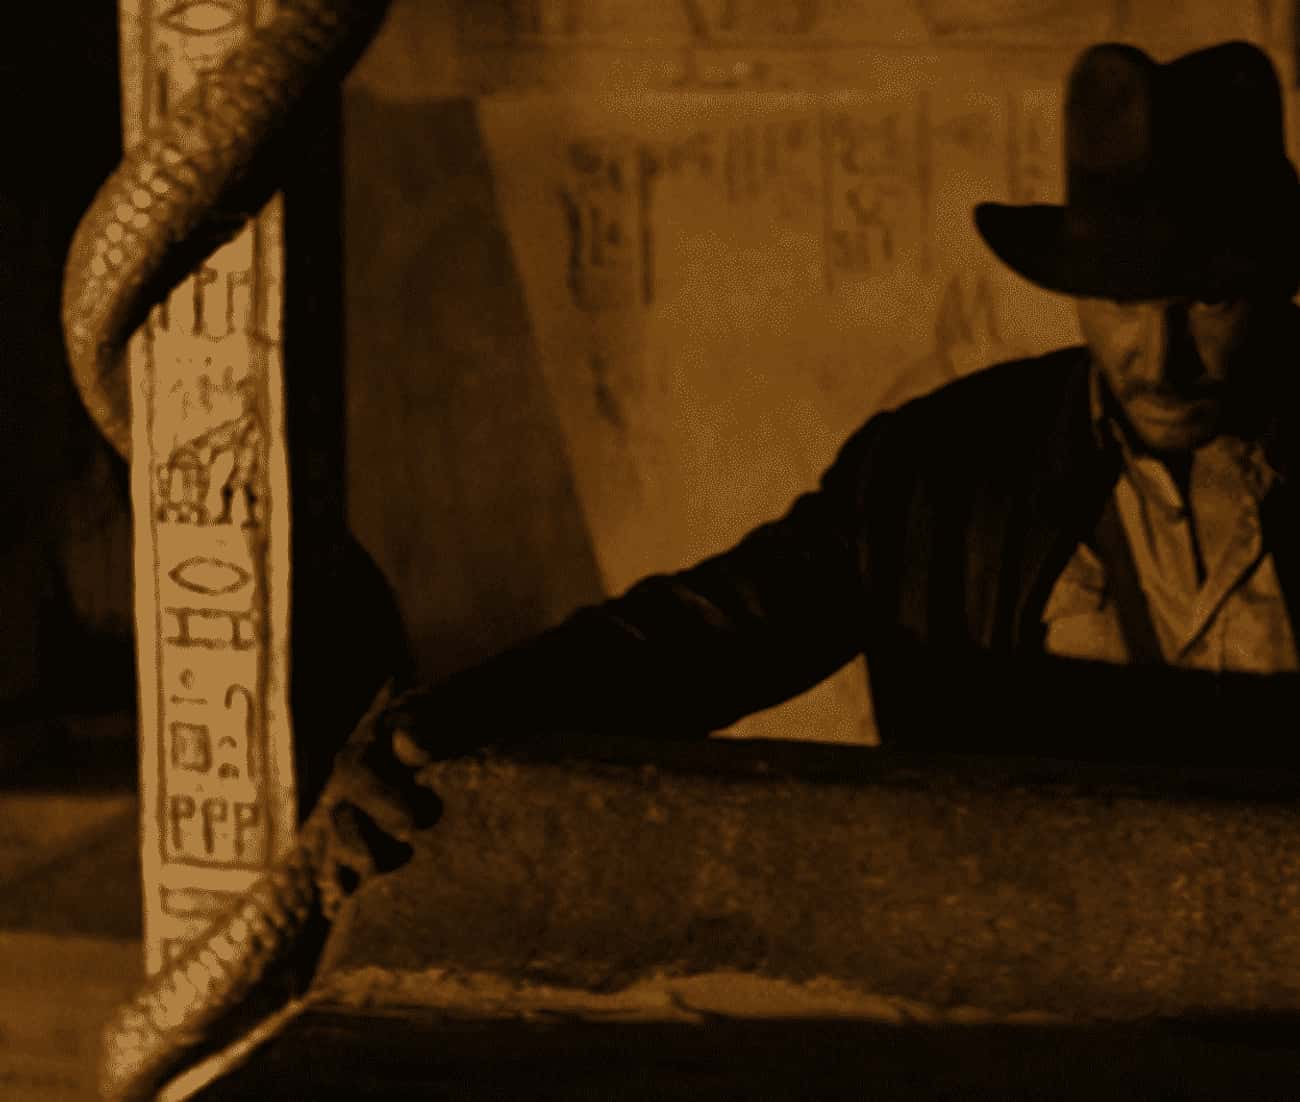 R2-D2 And C-3P0 Make A Cameo In 'Raiders of the Lost Ark'